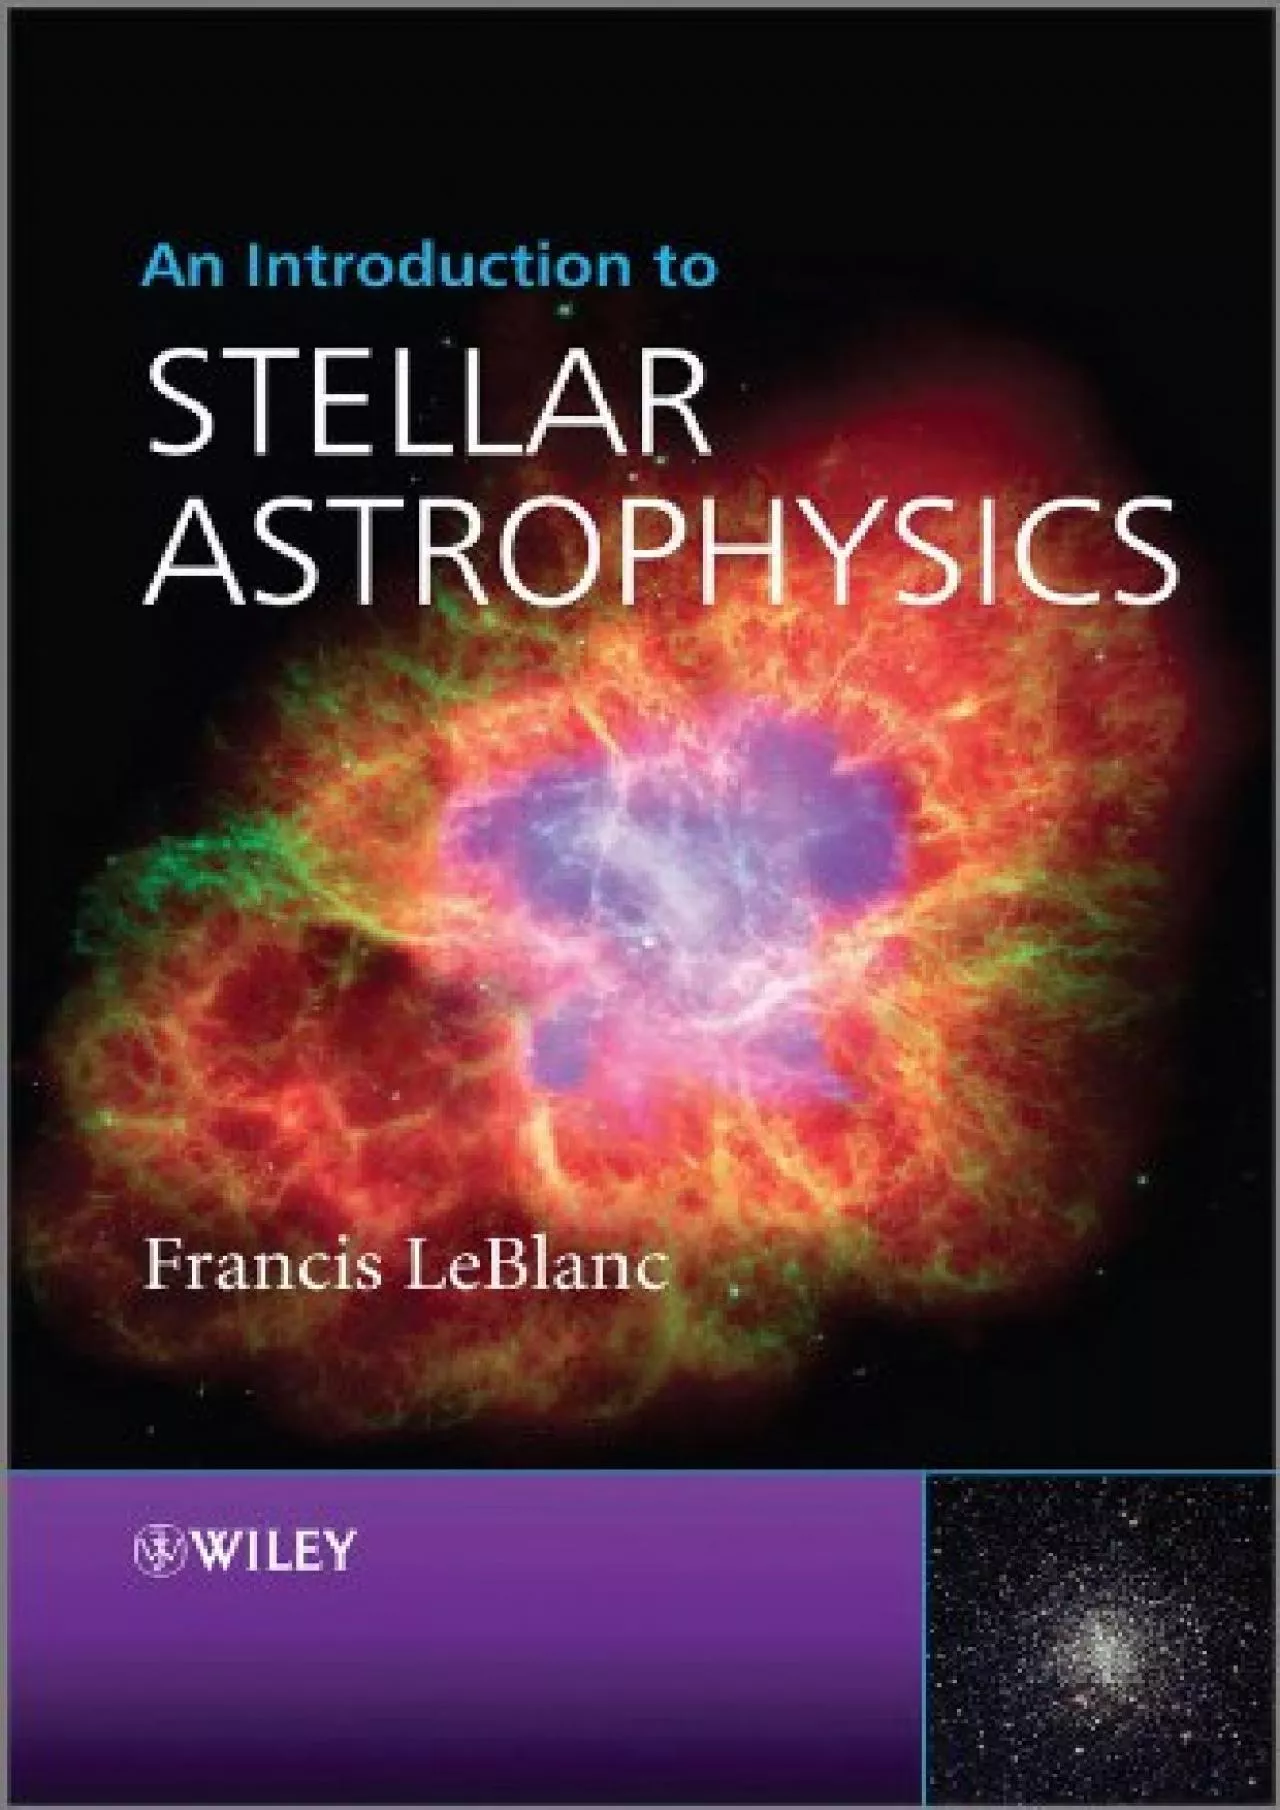 (BOOK)-An Introduction to Stellar Astrophysics